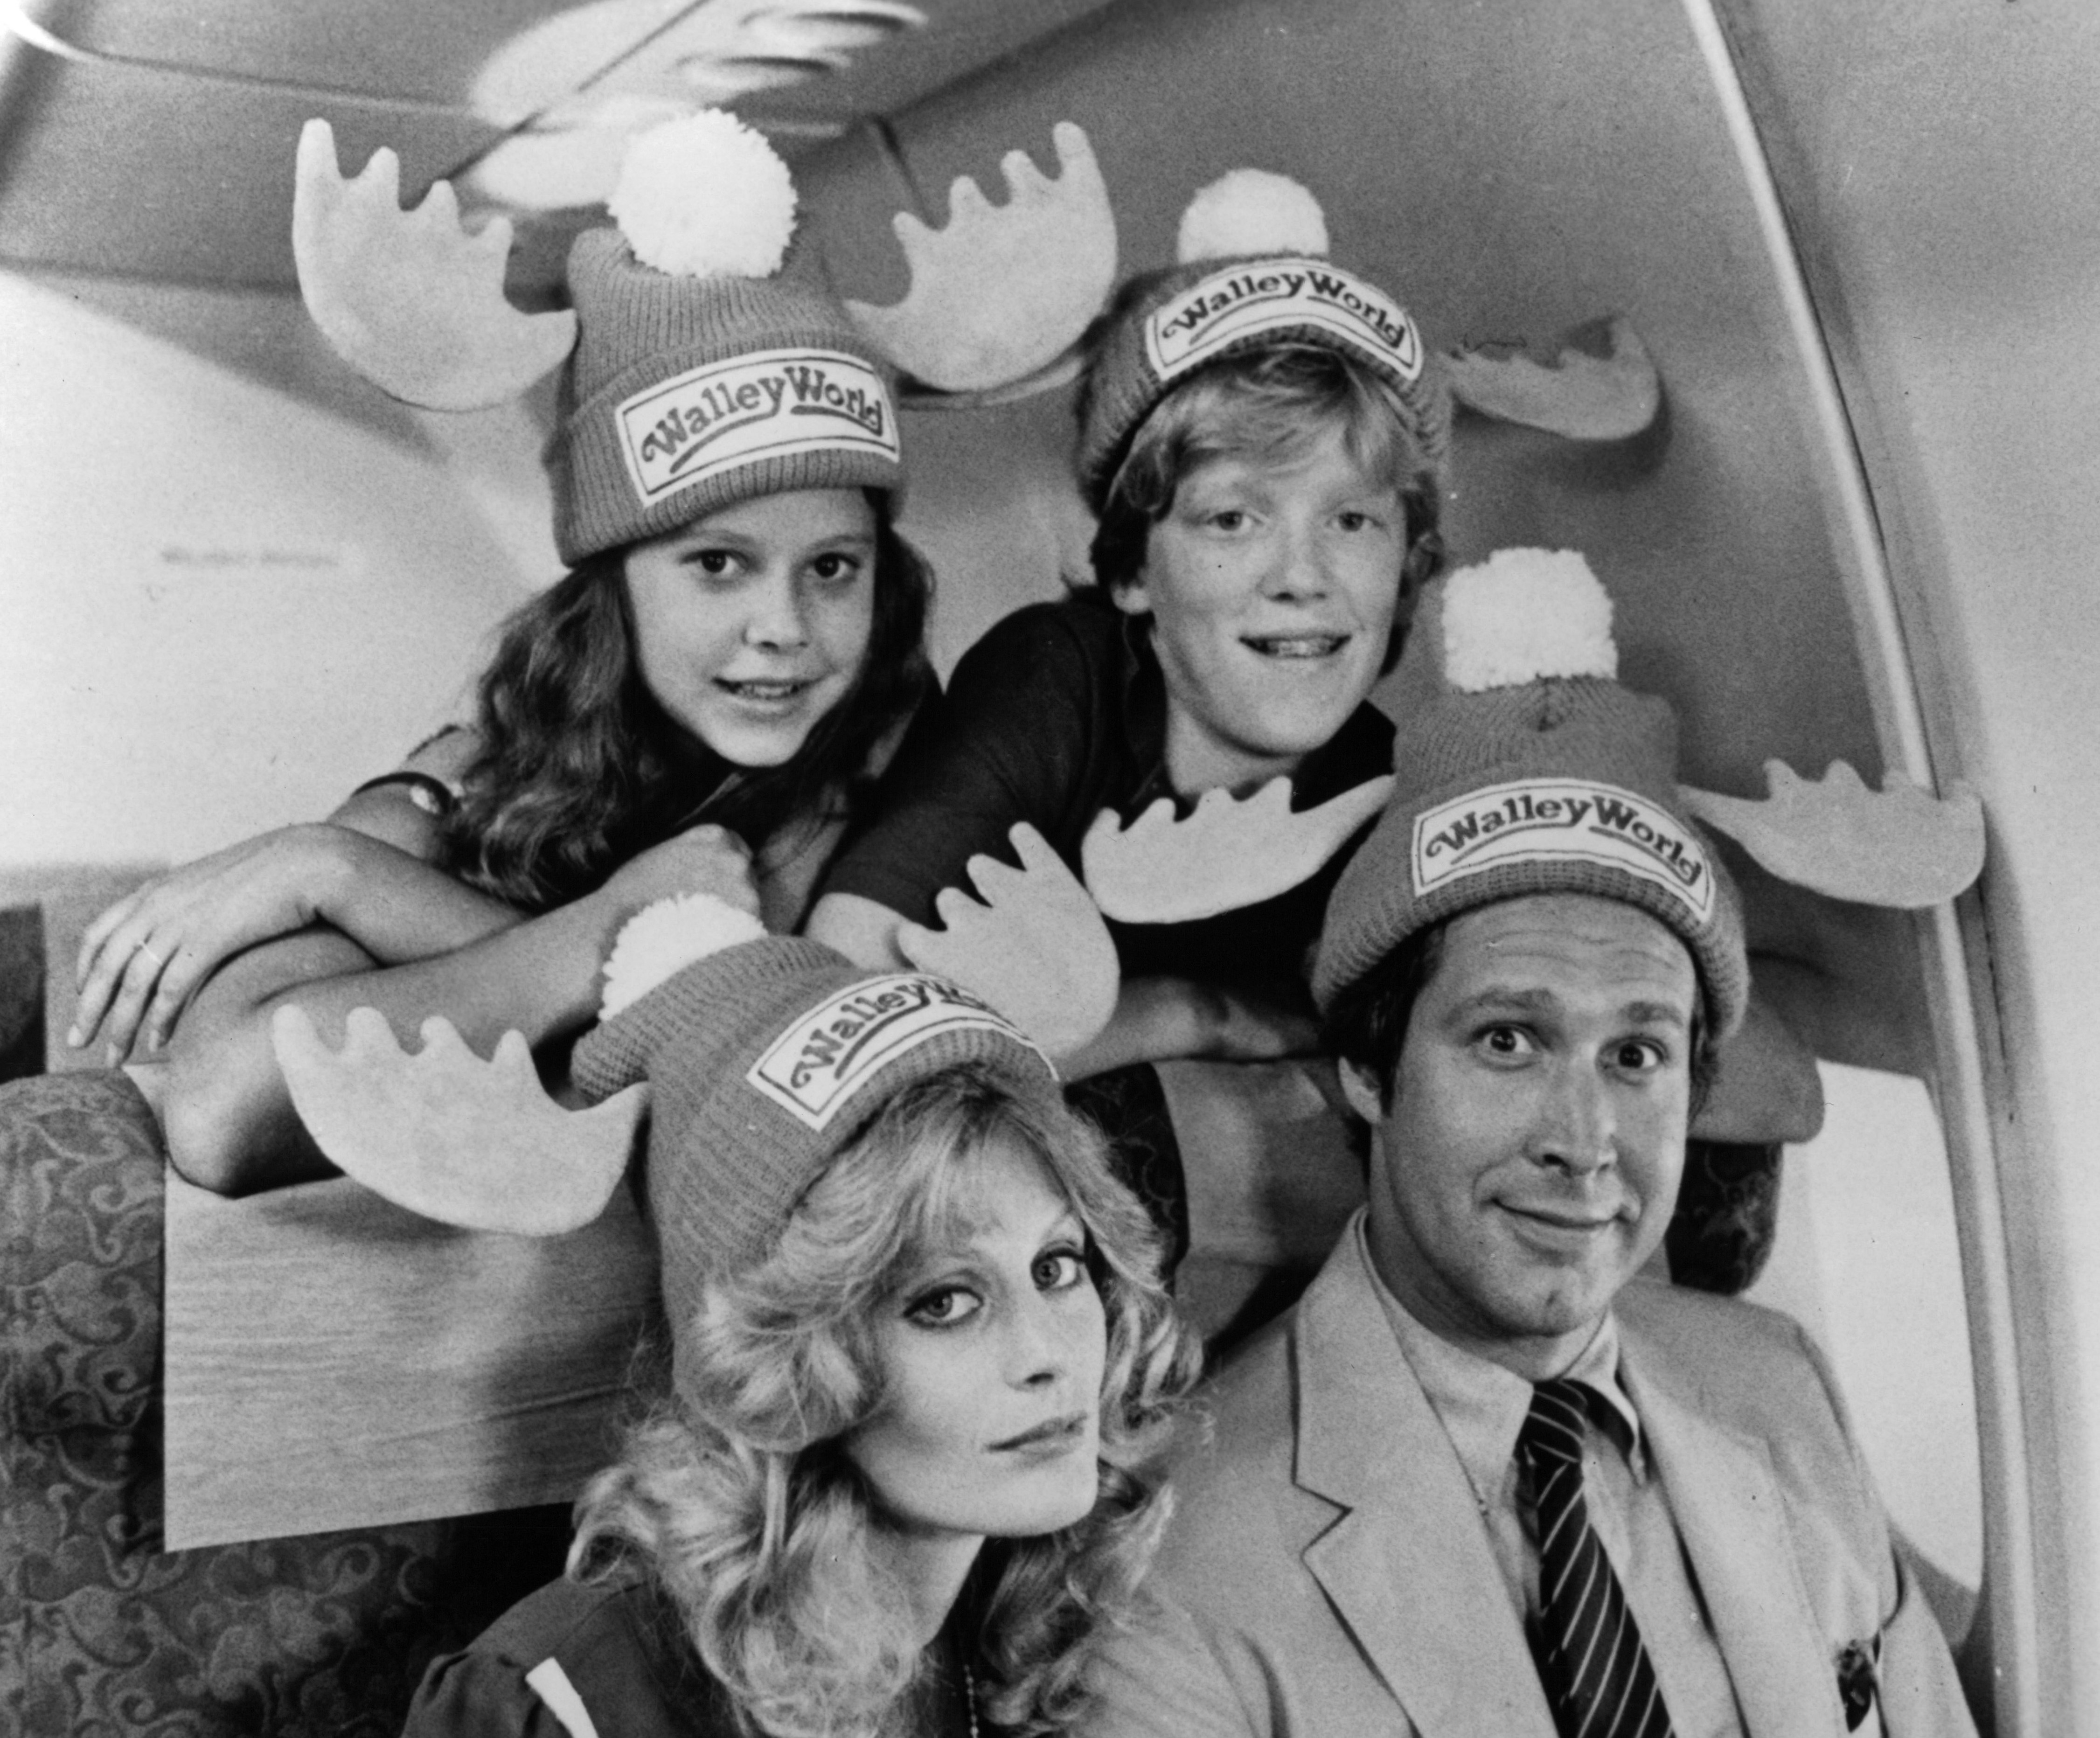 Dana Barron, Anthony Michael Hall, Beverly D'Angelo, and Chevy Chase pose for the Warner Bros. movie "National Lampoon's Vacation," in 1983. | Source: Getty Images